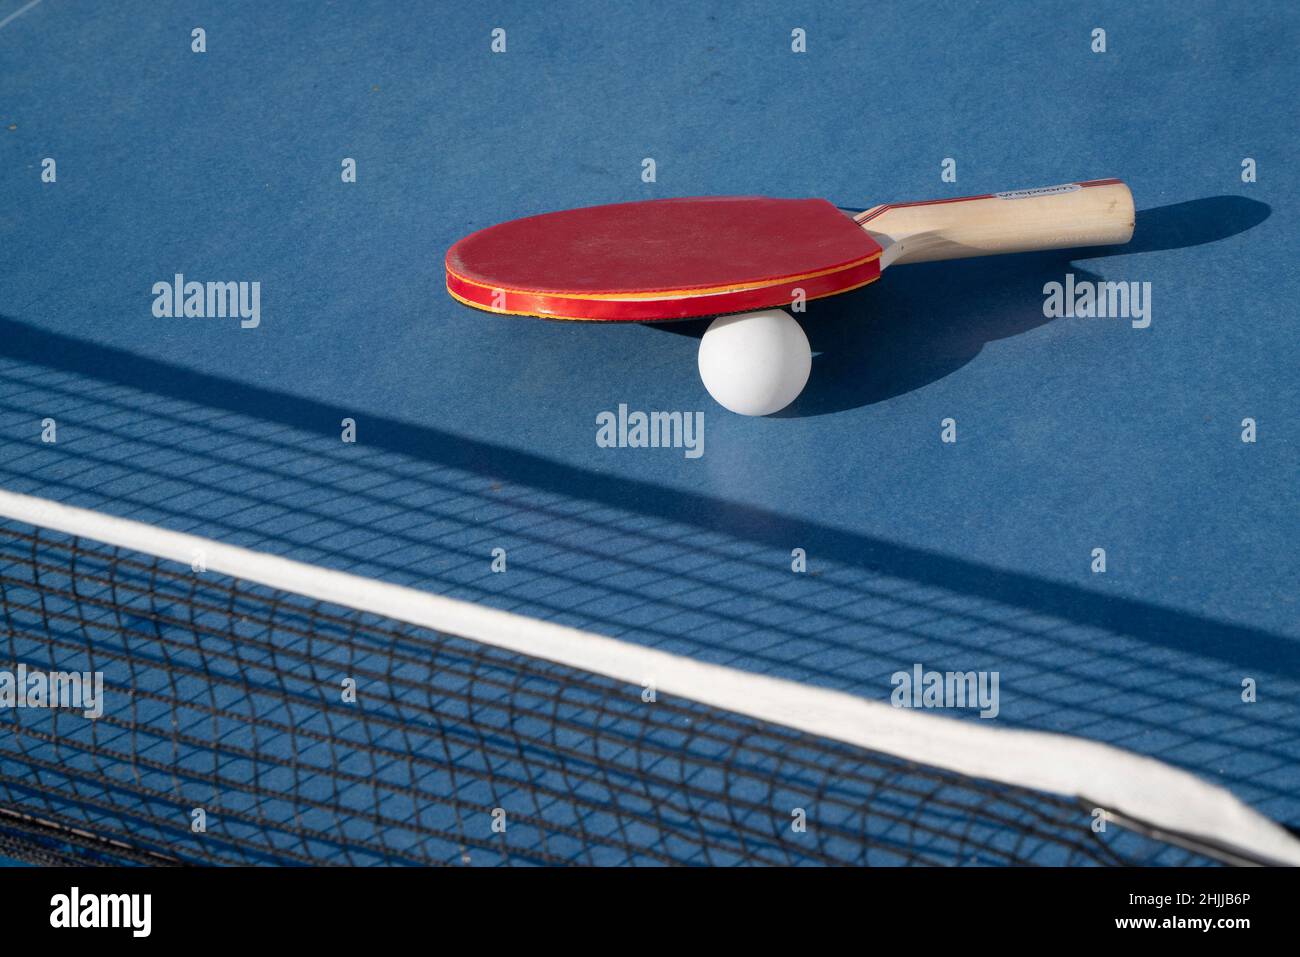 Ping pong racquet, ball and net Stock Photo